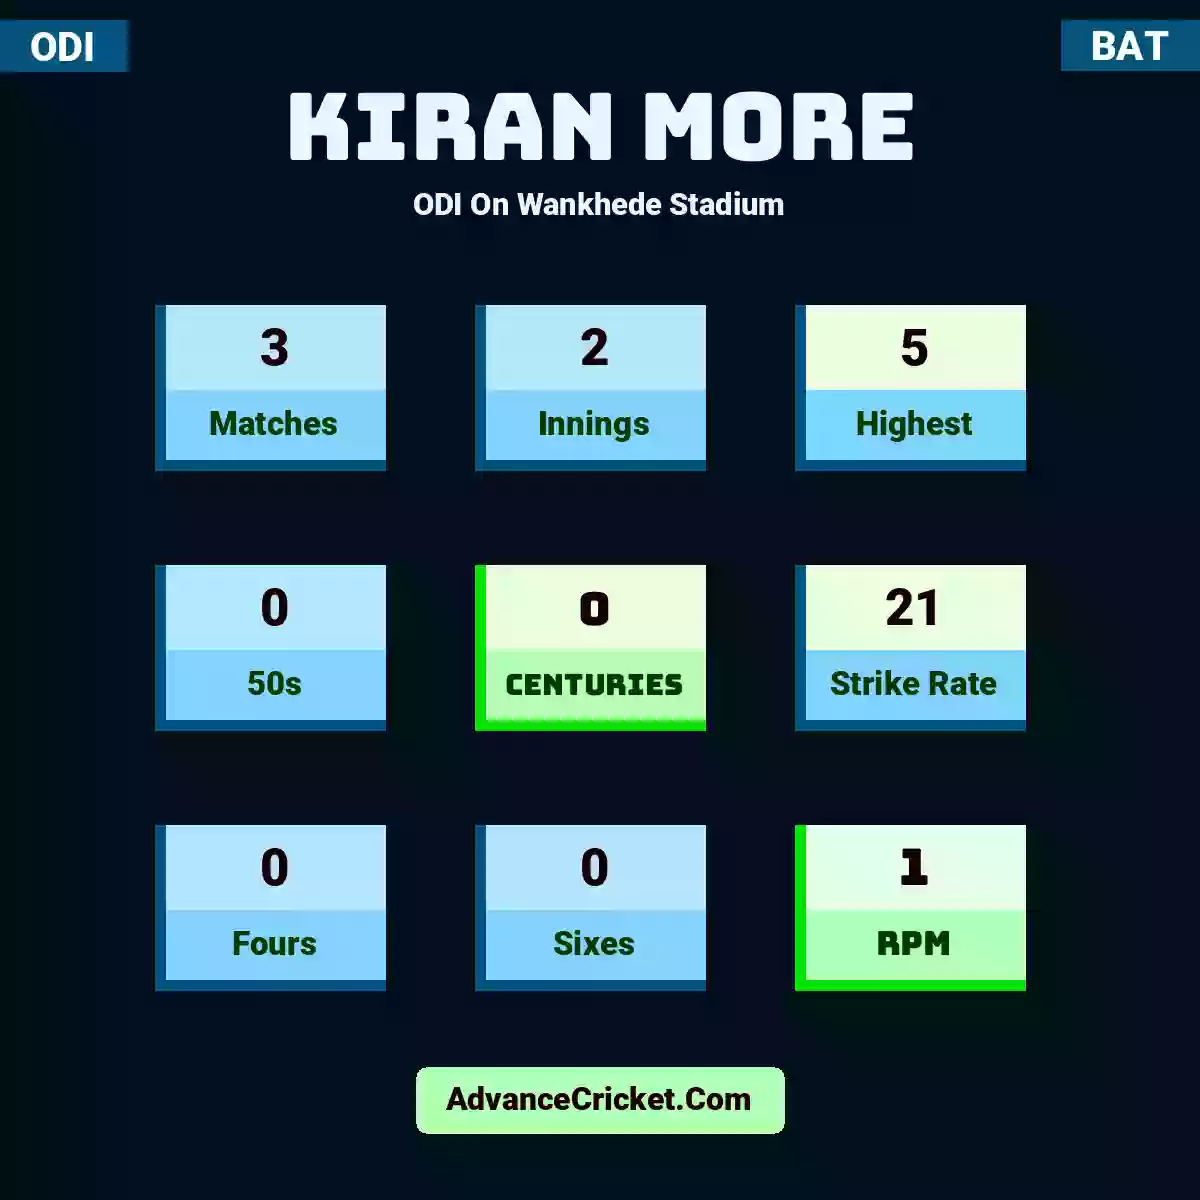 Kiran More ODI  On Wankhede Stadium, Kiran More played 3 matches, scored 5 runs as highest, 0 half-centuries, and 0 centuries, with a strike rate of 21. K.More hit 0 fours and 0 sixes, with an RPM of 1.